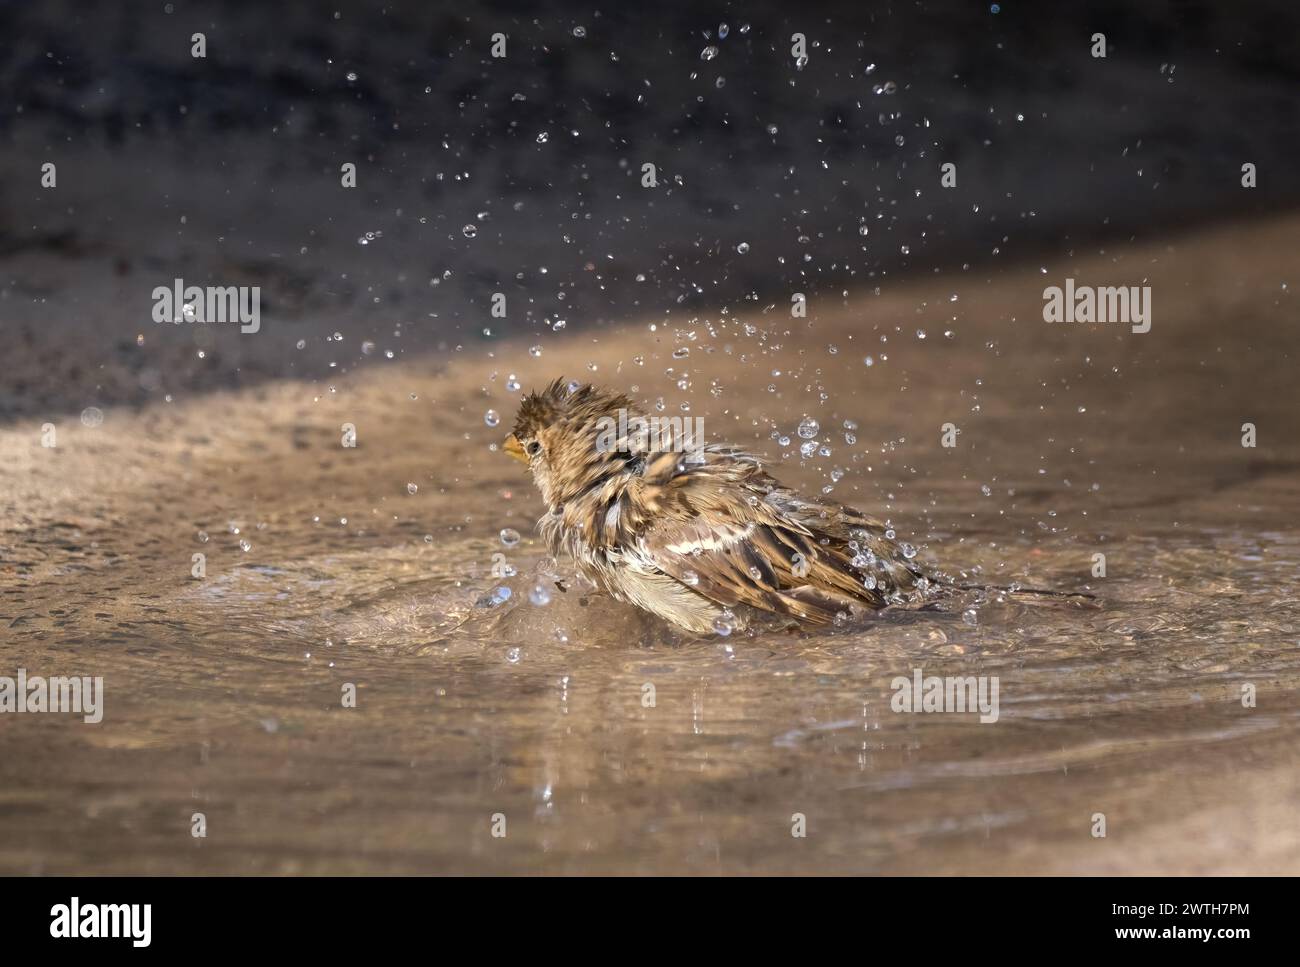 Bathing Spanish sparrow (Passer hispaniolensis) shaking itself with many drops of water Stock Photo